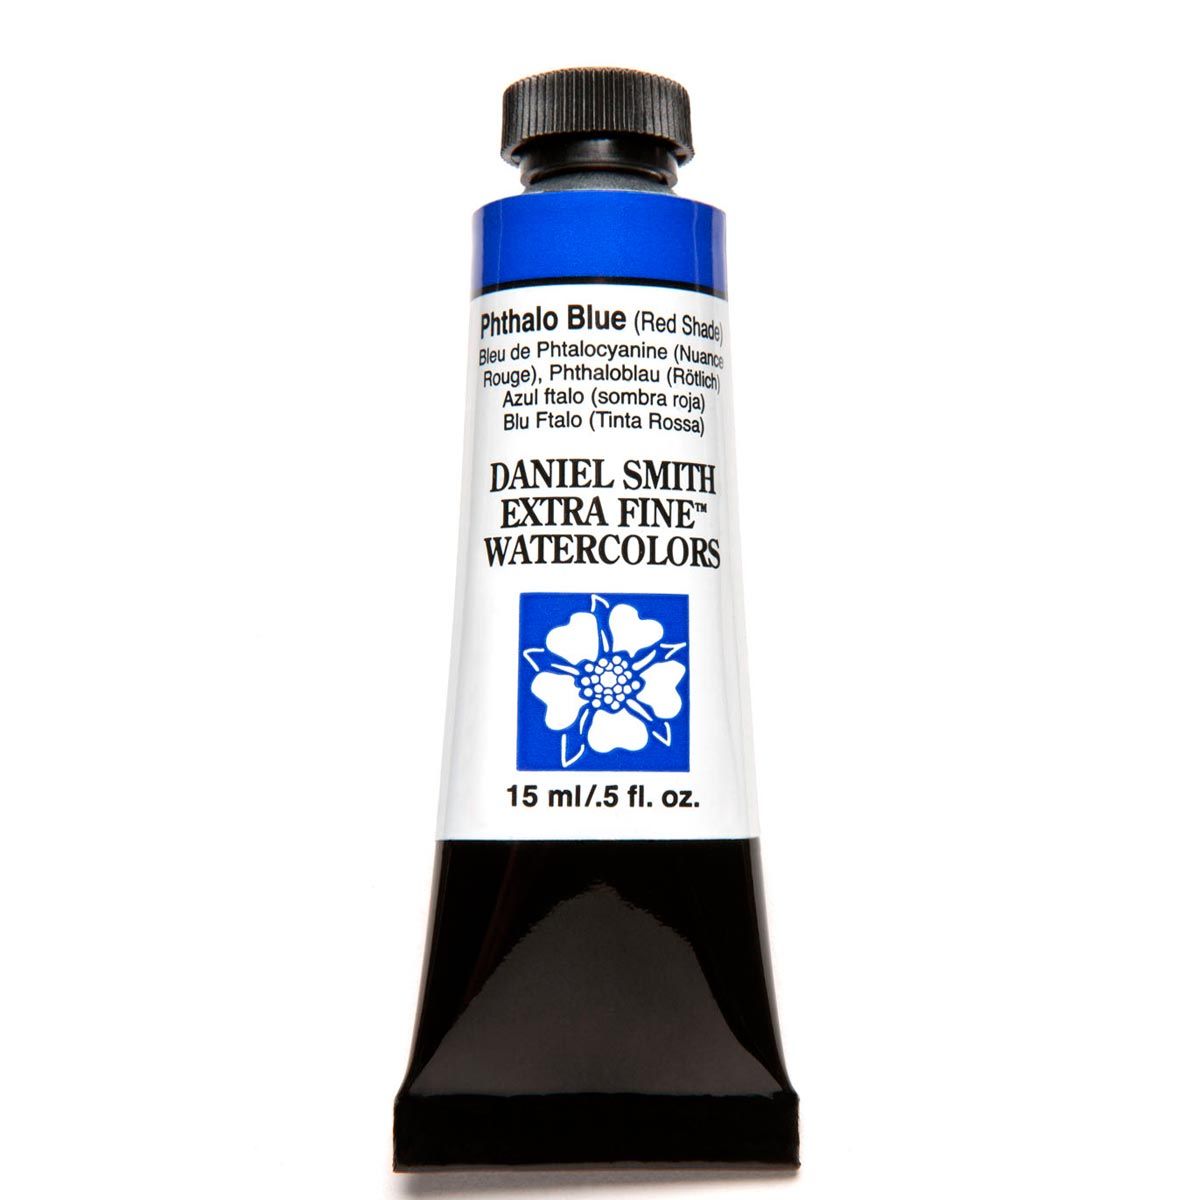 Daniel Smith Extra Fine Watercolour Phthalo Blue (Red Shade) 15ml